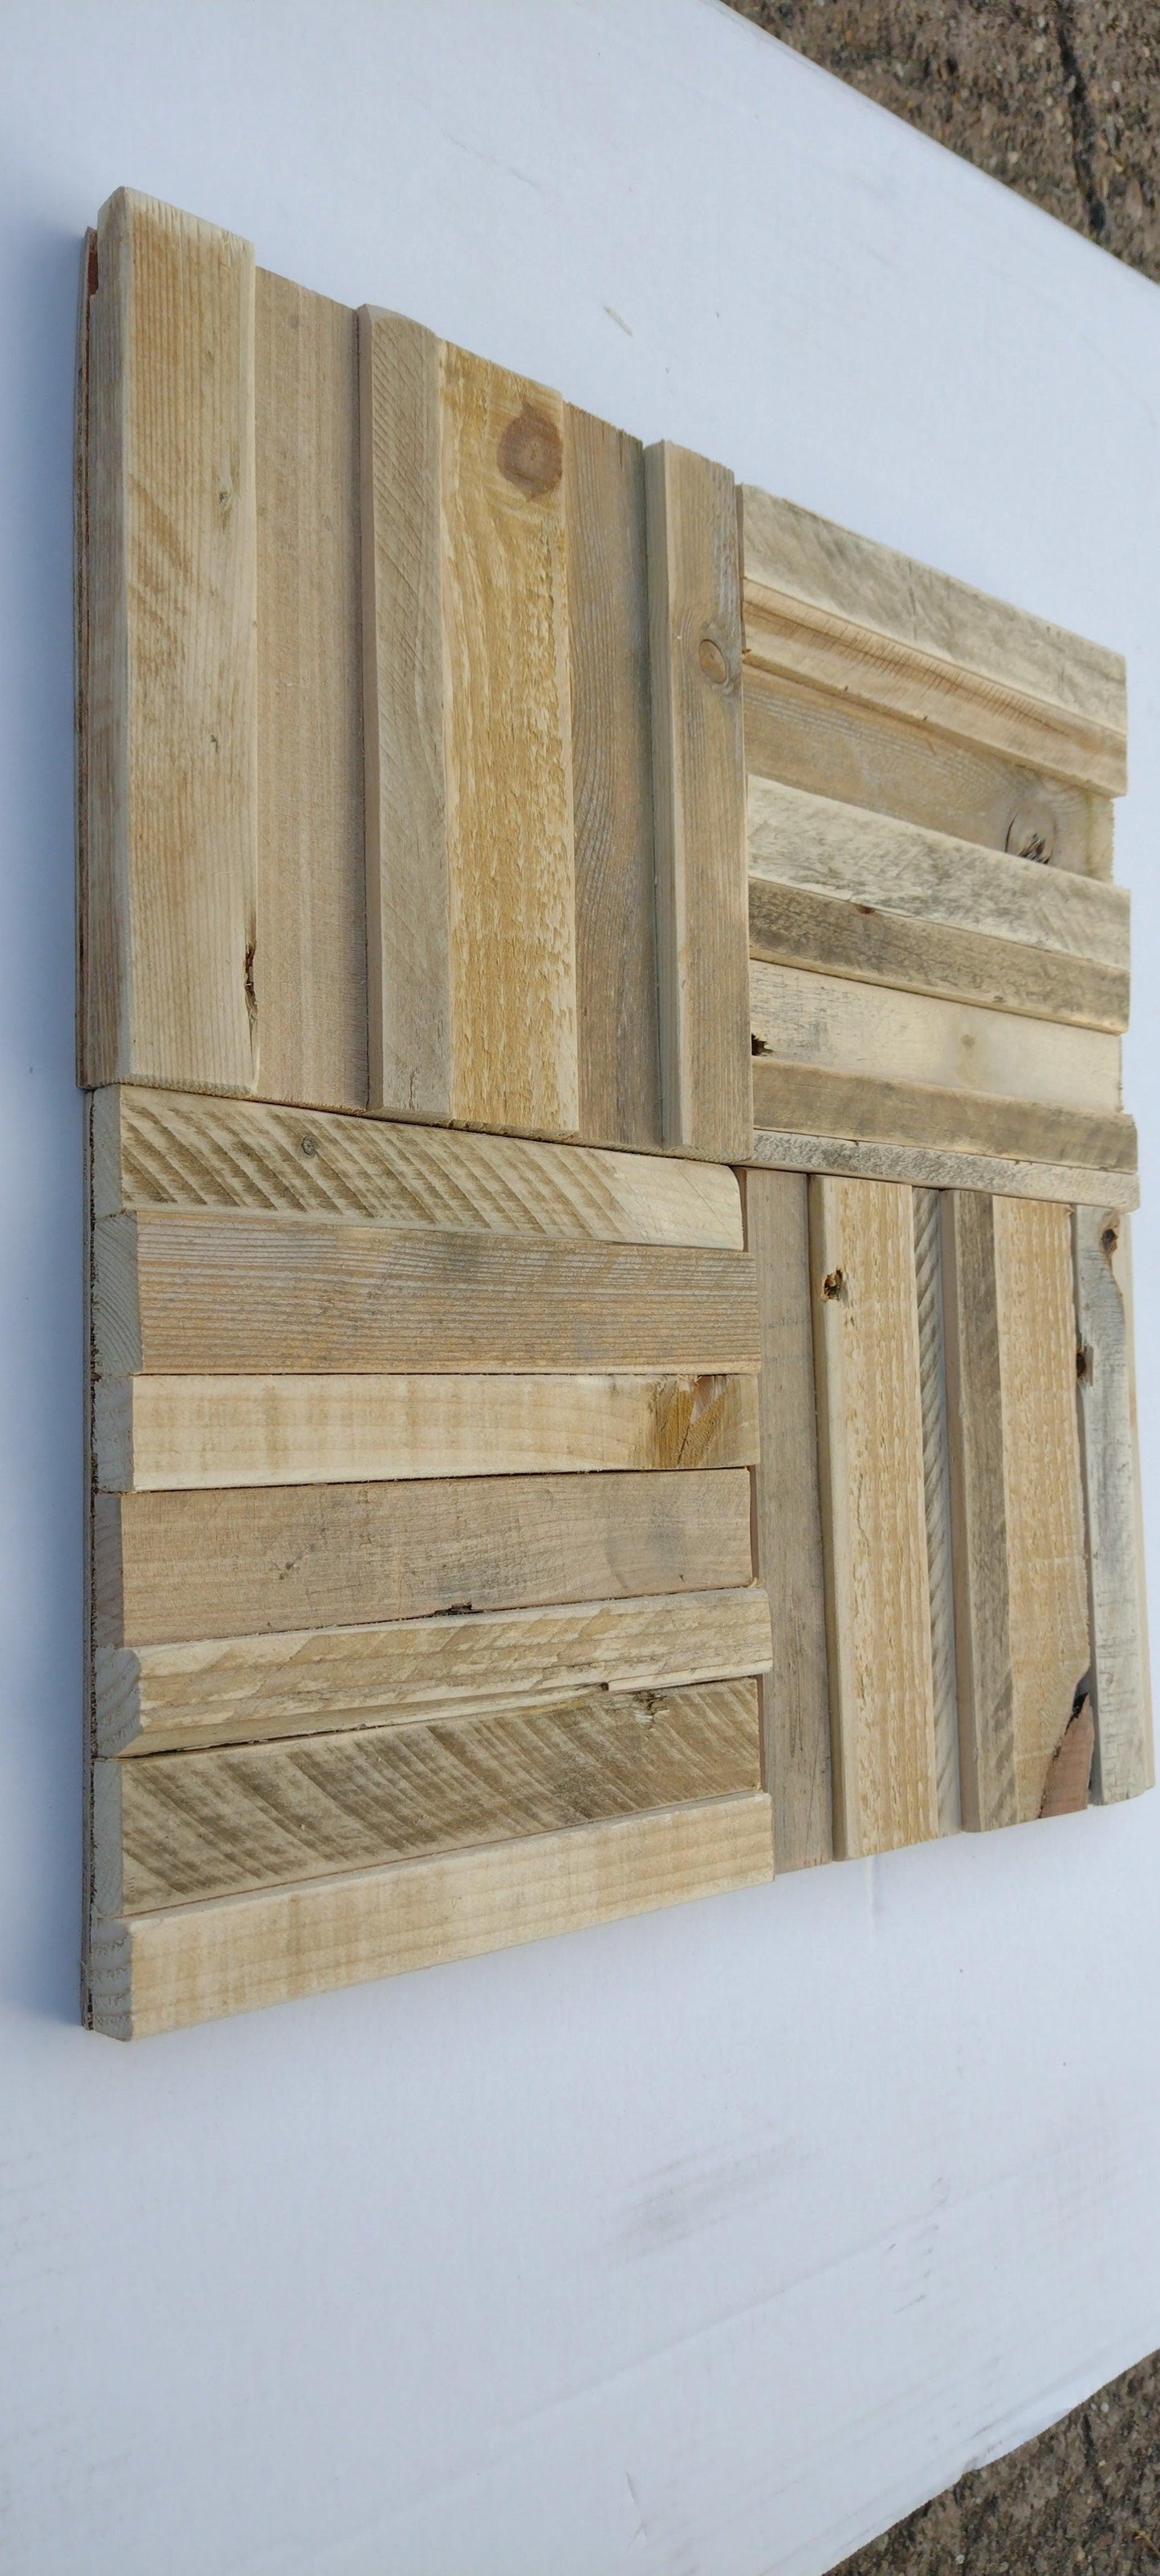 3D Mosaic Tile - Rustic Stick On Wall - Decorative Wooden Cladding